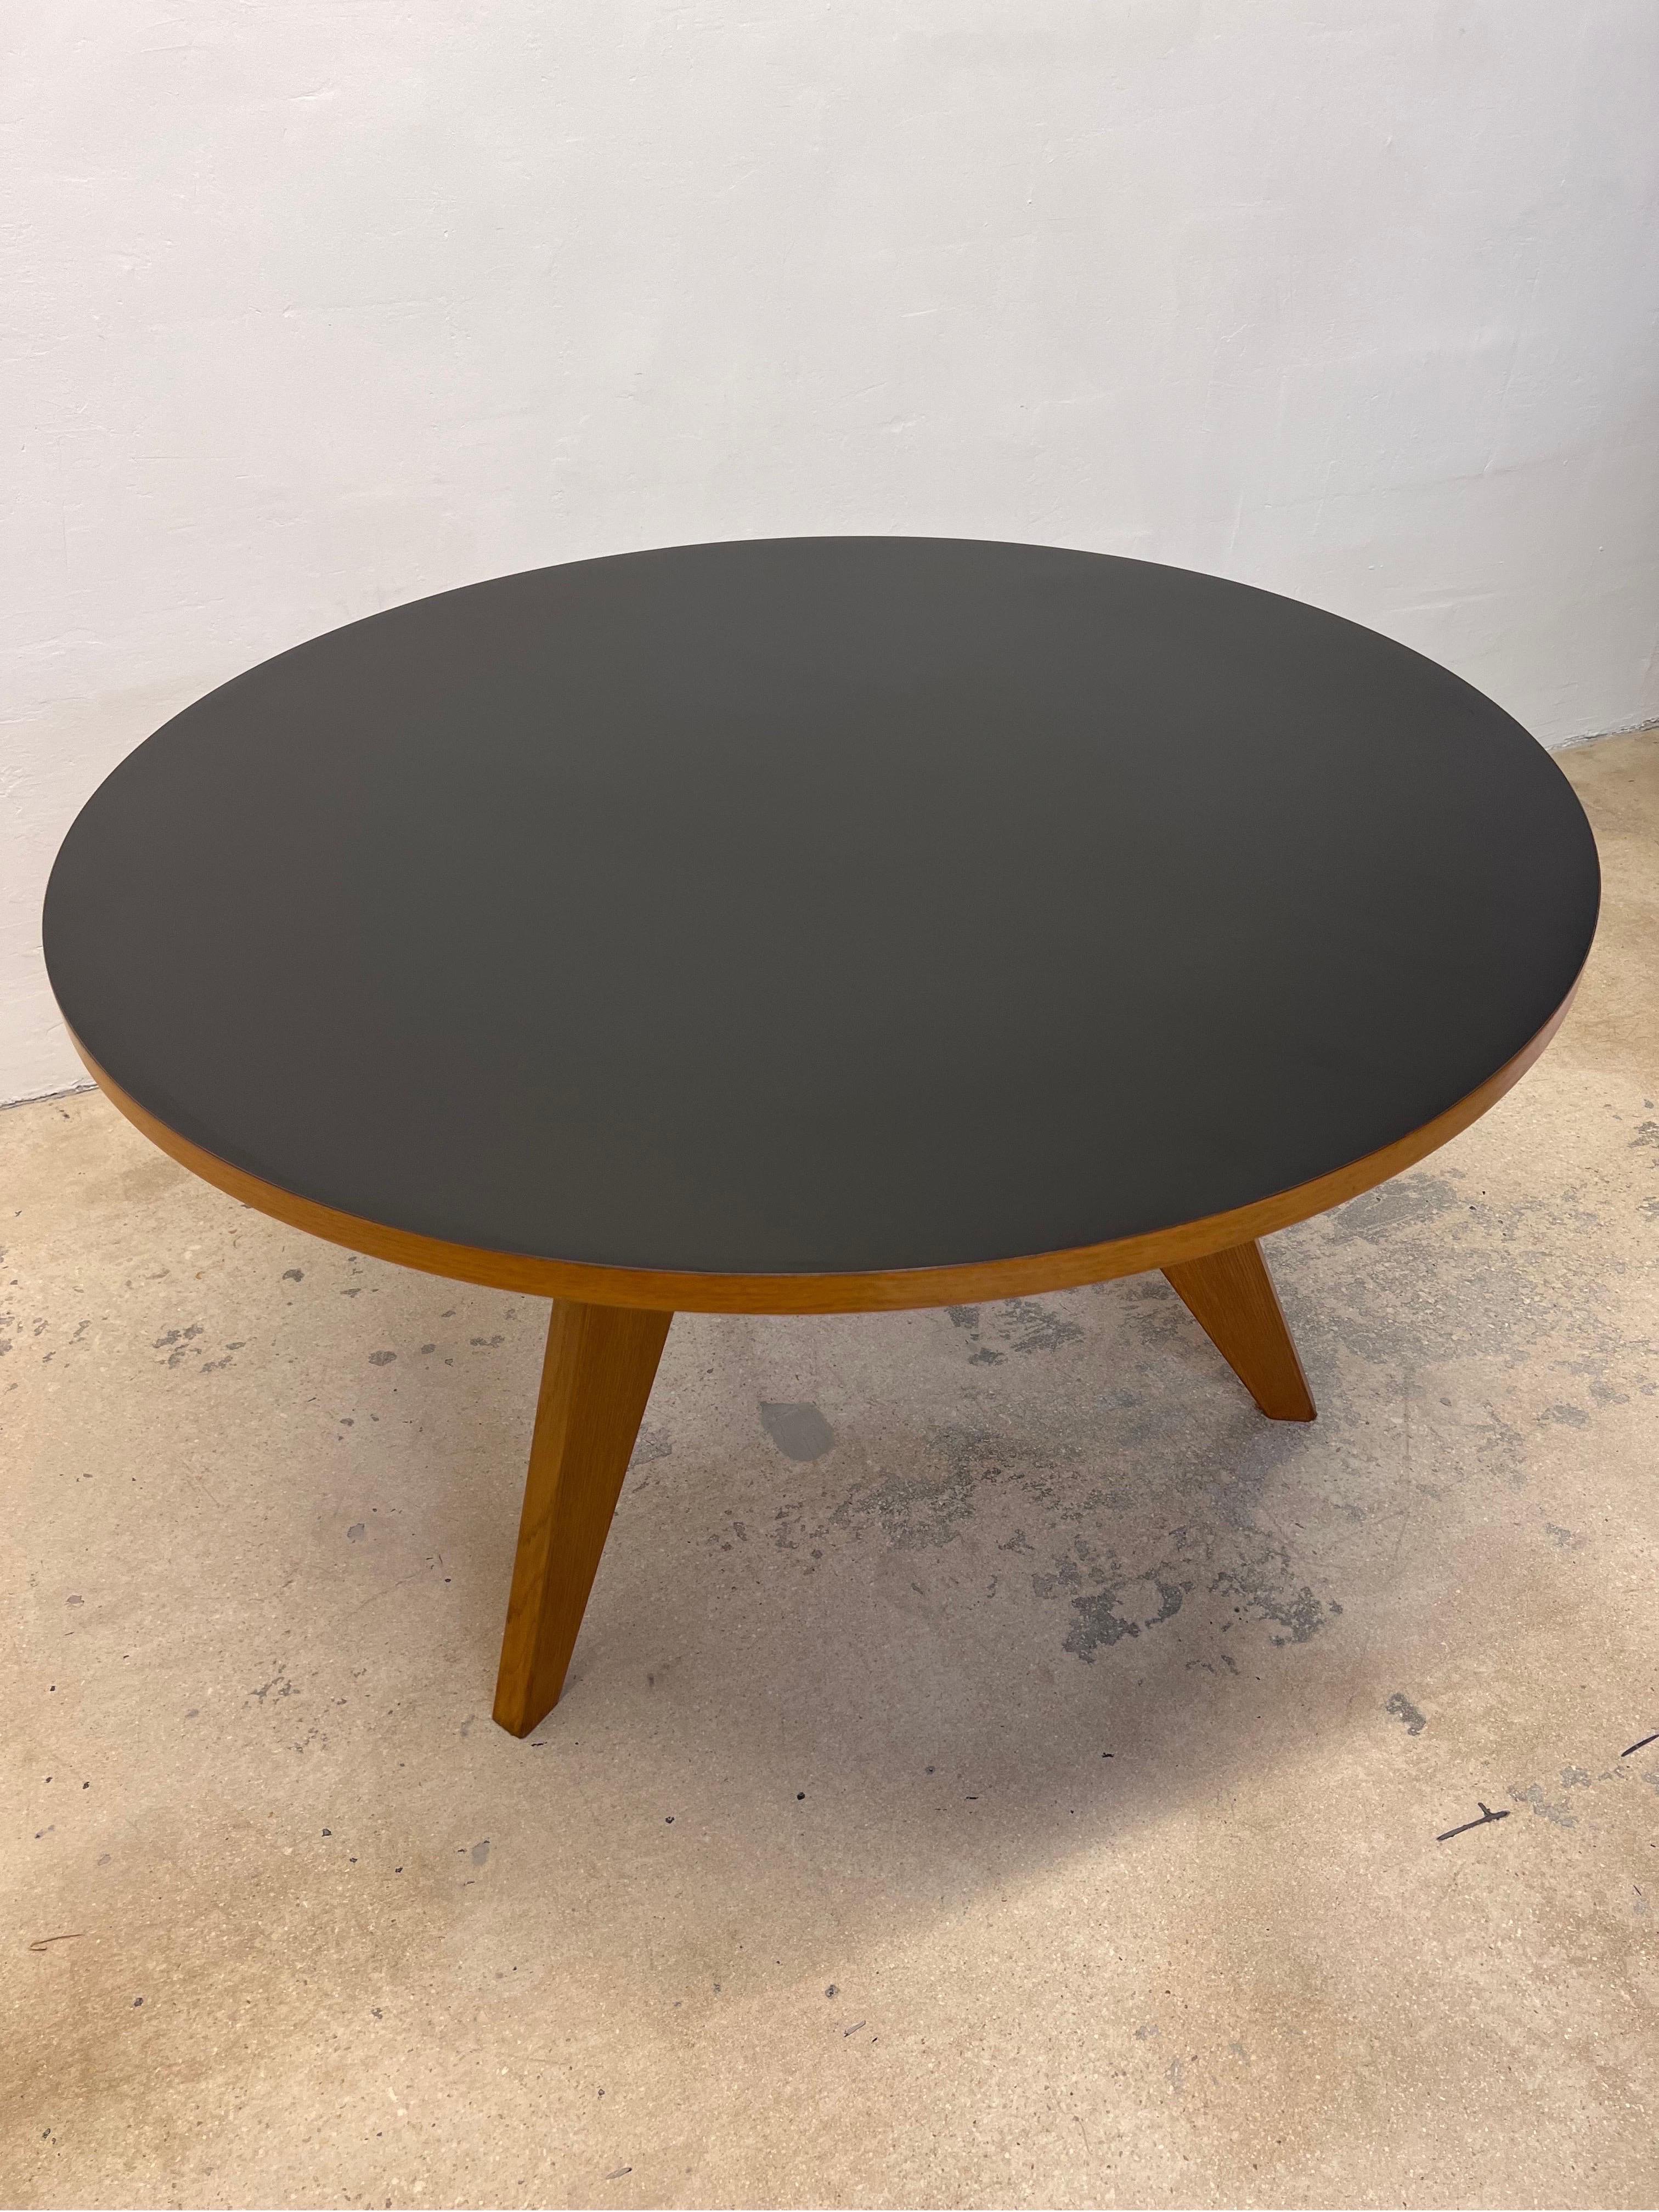 20th Century Jean Prouve Gueridon Dining Table in Oak with Matte Black Top for Vitra, 2002